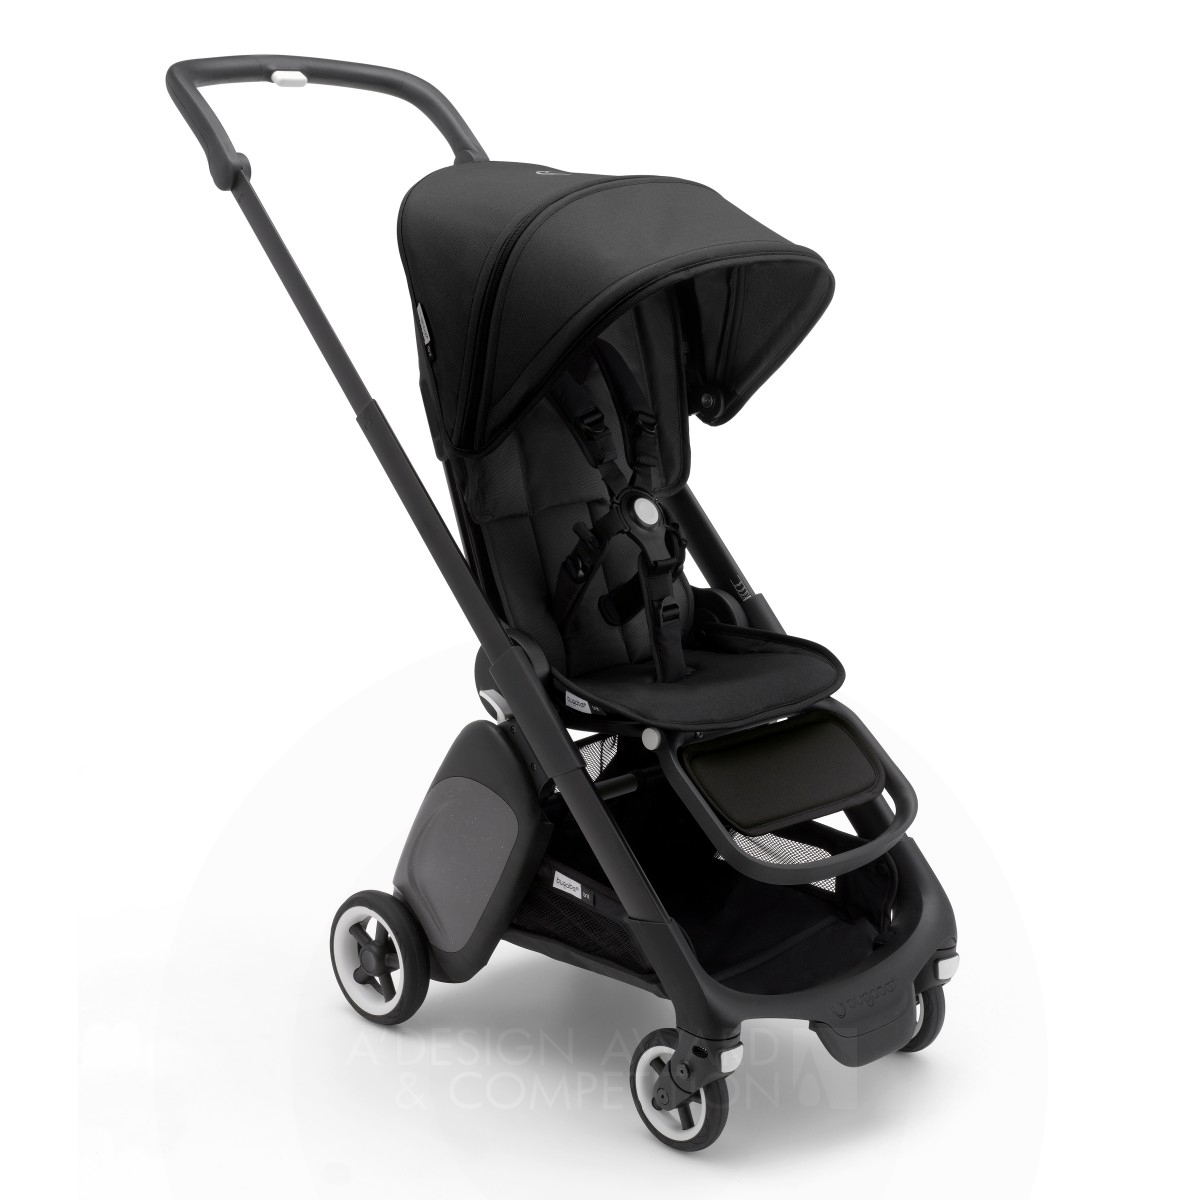 Bugaboo International BV wins Platinum at the prestigious A' Baby, Kids and Children's Products Design Award with Bugaboo Ant Travel Stroller.